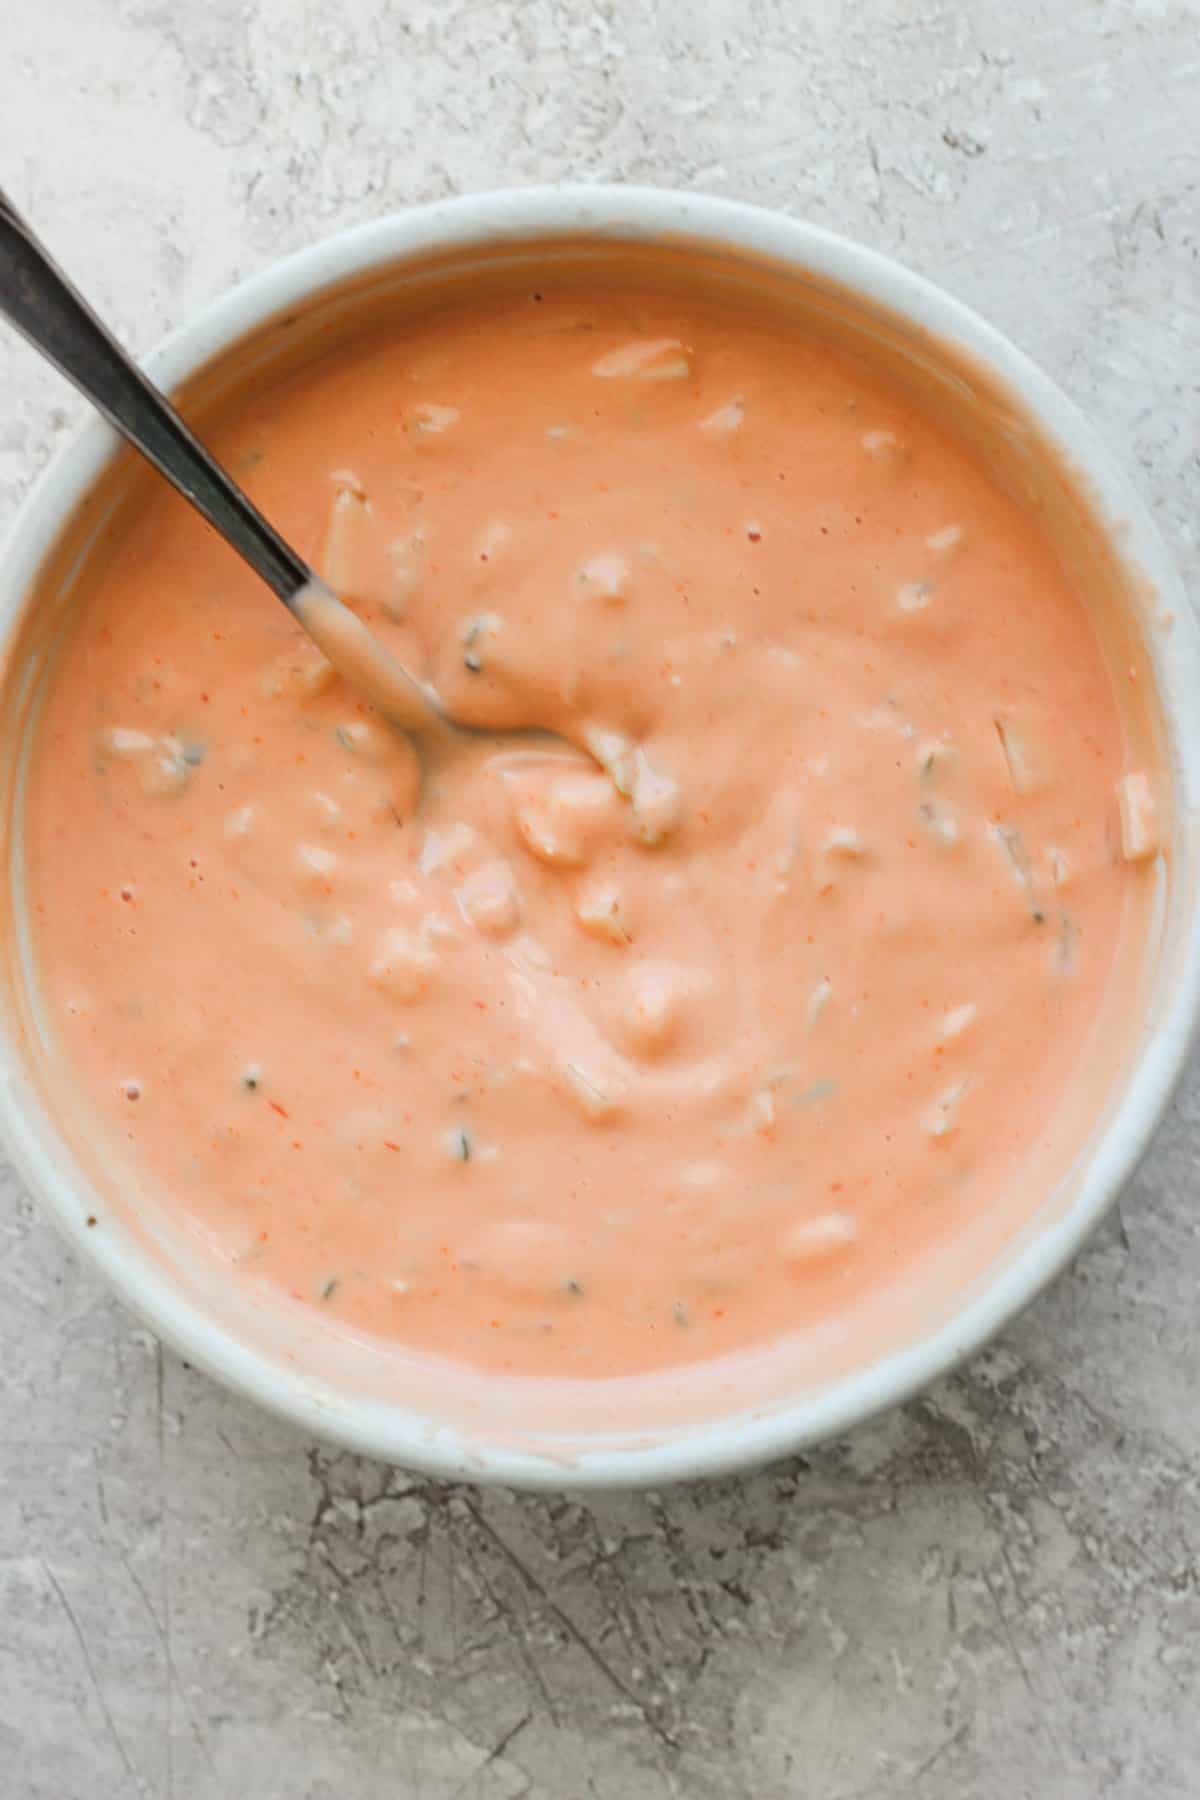 A bowl of creamy tomato soup with herbs, served with a spoon.